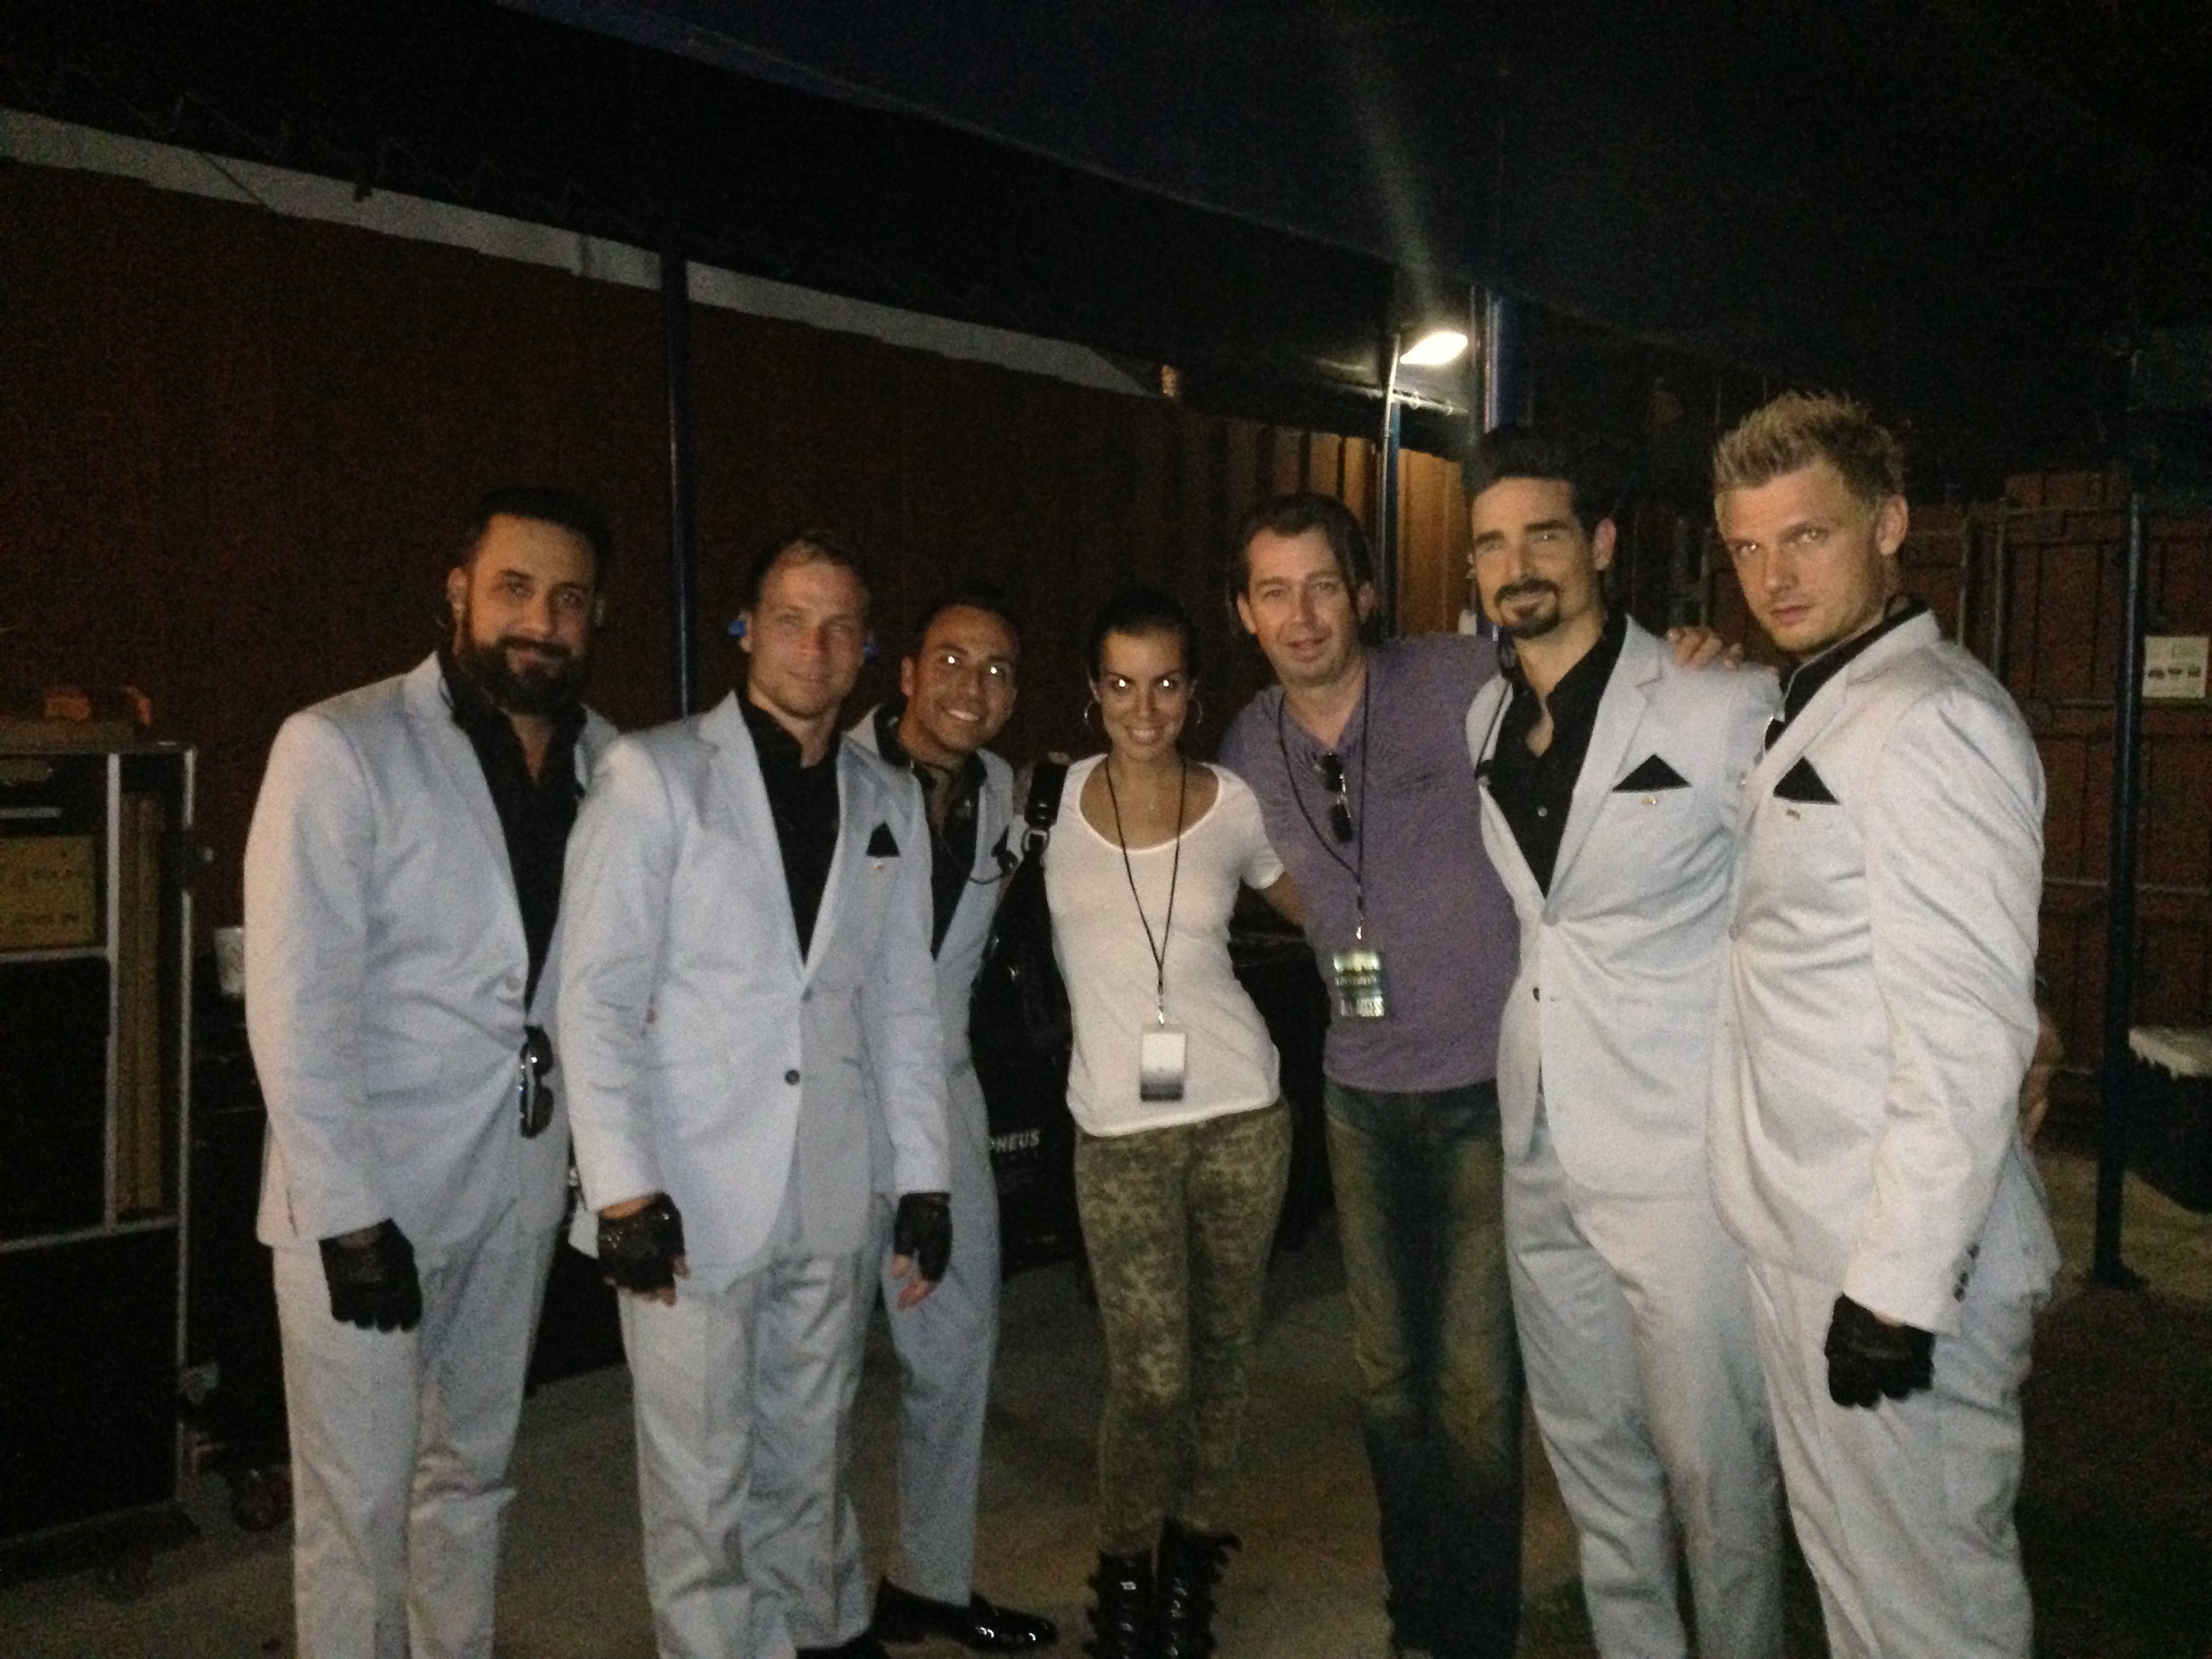 Backstage with the Backstreet Boys before their concert